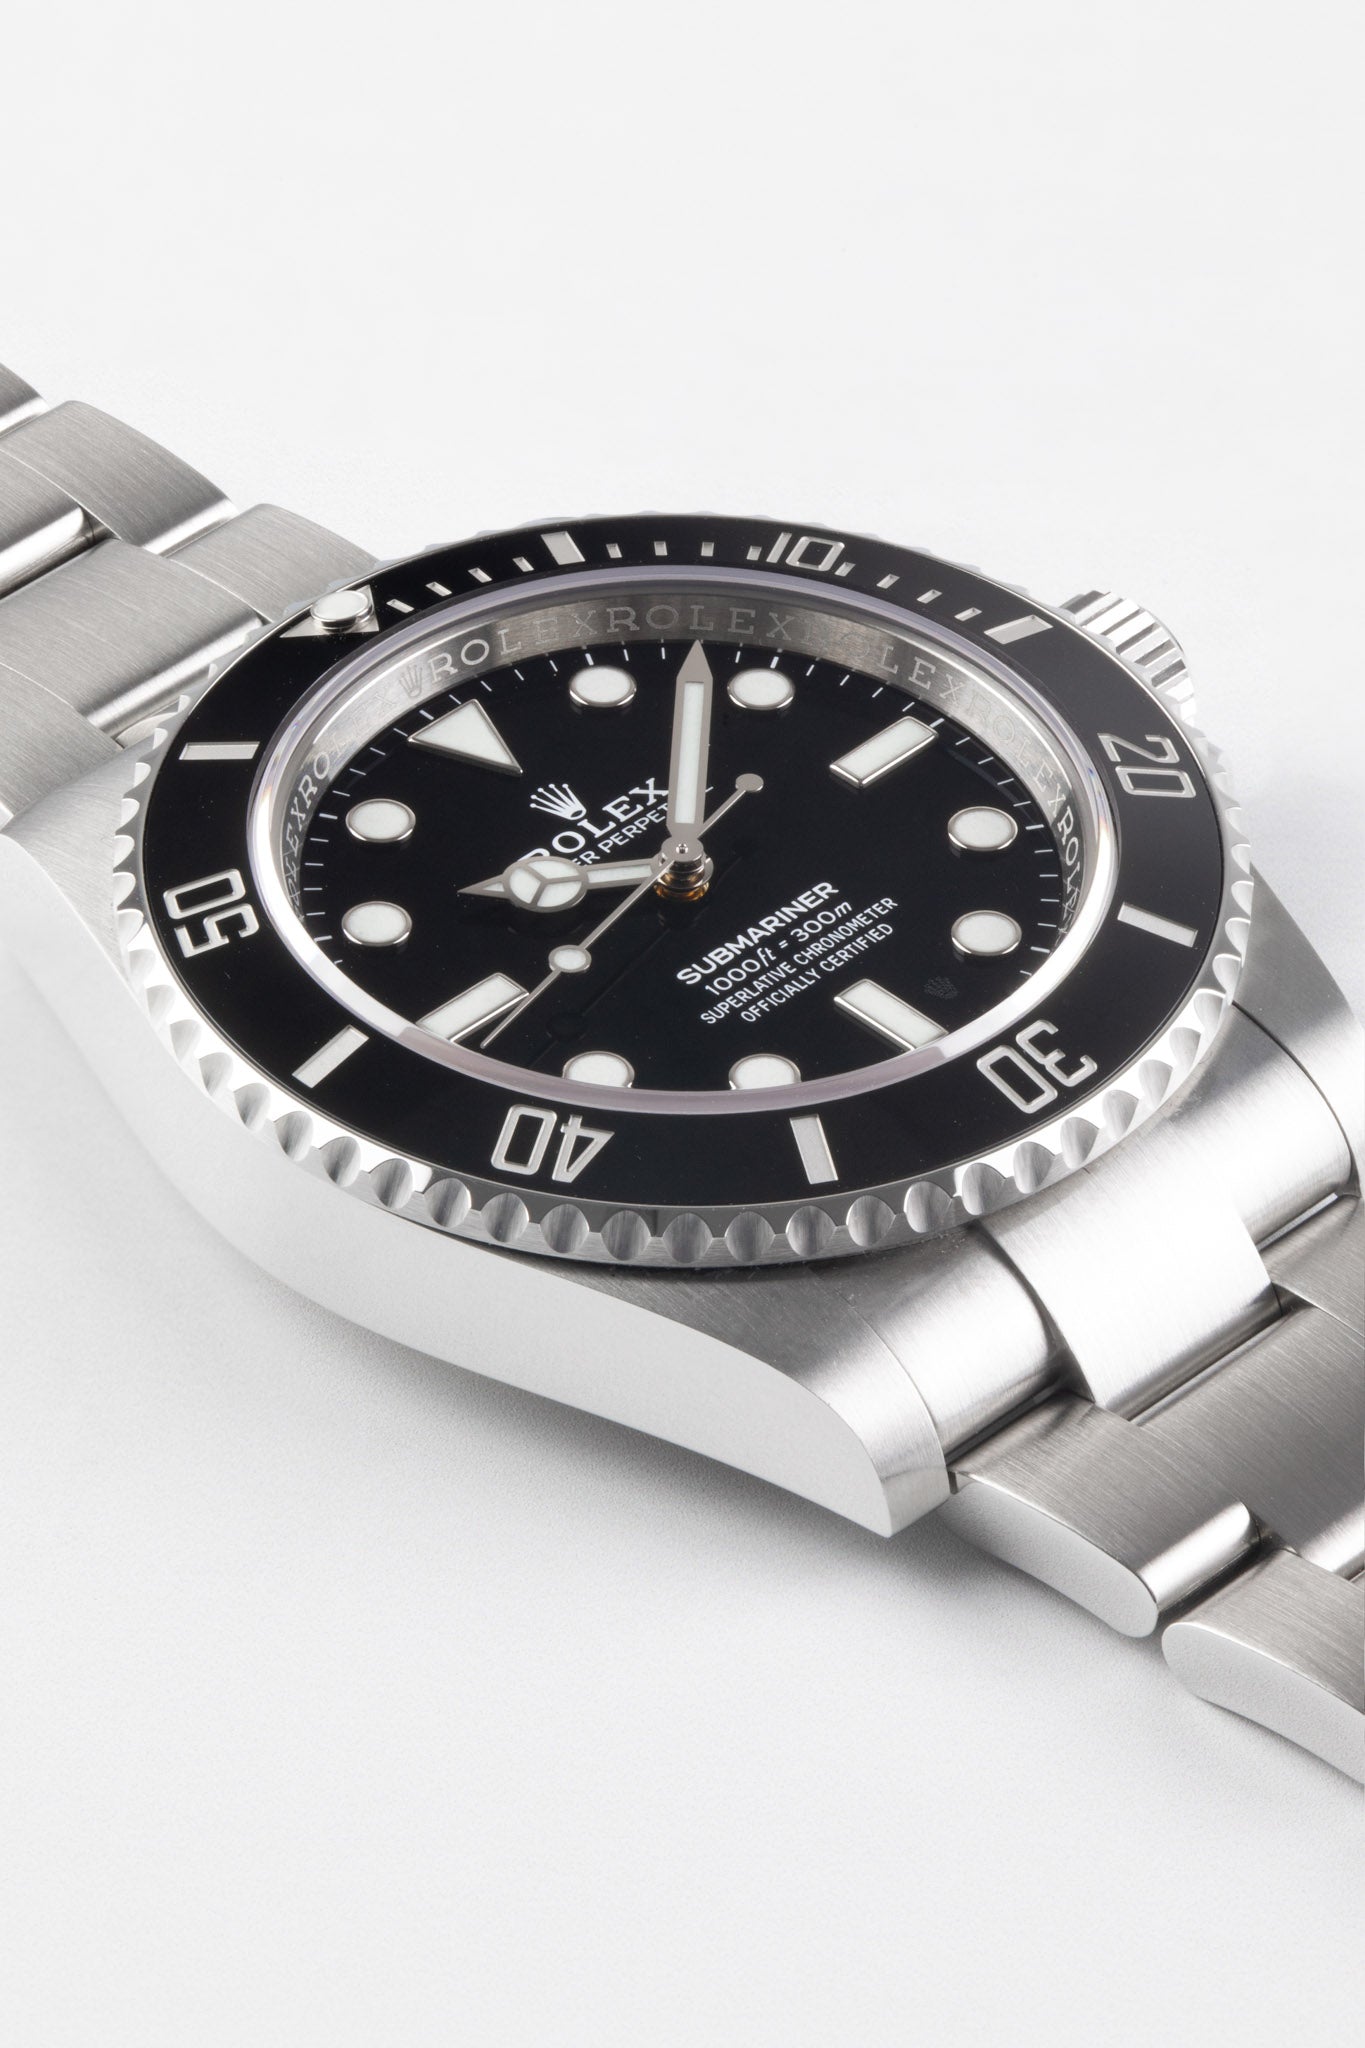 INTRODUCING: The Rolex Submariner Ref. 124060 41mm no-date and the  one-inch-punch the world is talking about